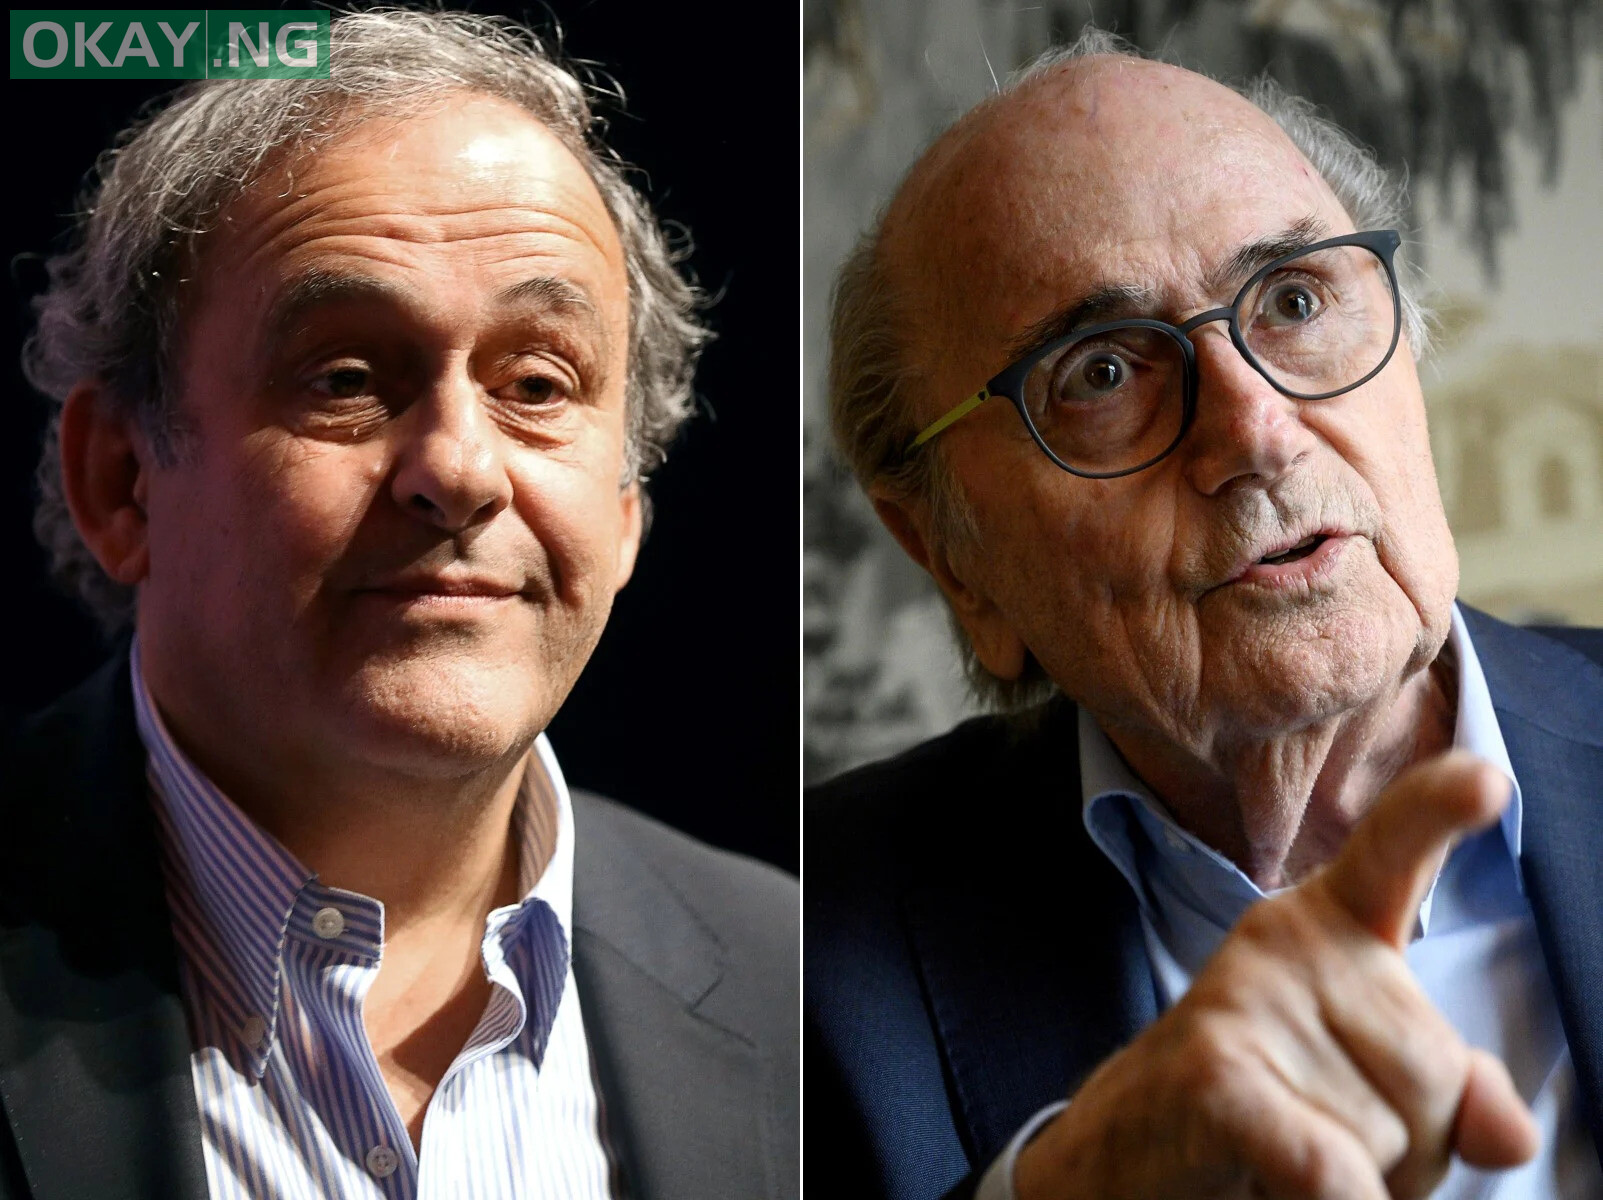 In this file image shows combination of pictures created on August 30, 2020 shows a file photo taken on November 22, 2019 of French football legend Michel Platini attending an event to receive a "Legendes du Sport" (Sports Legends) award at the Musee National du Sport (National Sports Museum) in the French riviera city of Nice; and a file photo taken on May 28, 2019 of former FIFA president Sepp Blatter speaking during an interview with AFP in Zurich. - The Bellinzona court will hand down its verdict on July 8, 2022, in the trial of former UEFA president Michel Platini and former Fifa president Sepp Blatter. Blatter and Platini are being tried over a two-million-Swiss-franc ($2 million) payment in 2011 to the former France captain, who by that time was in charge of European football's governing body UEFA. (Photos by VALERY HACHE and Fabrice COFFRINI / AFP)